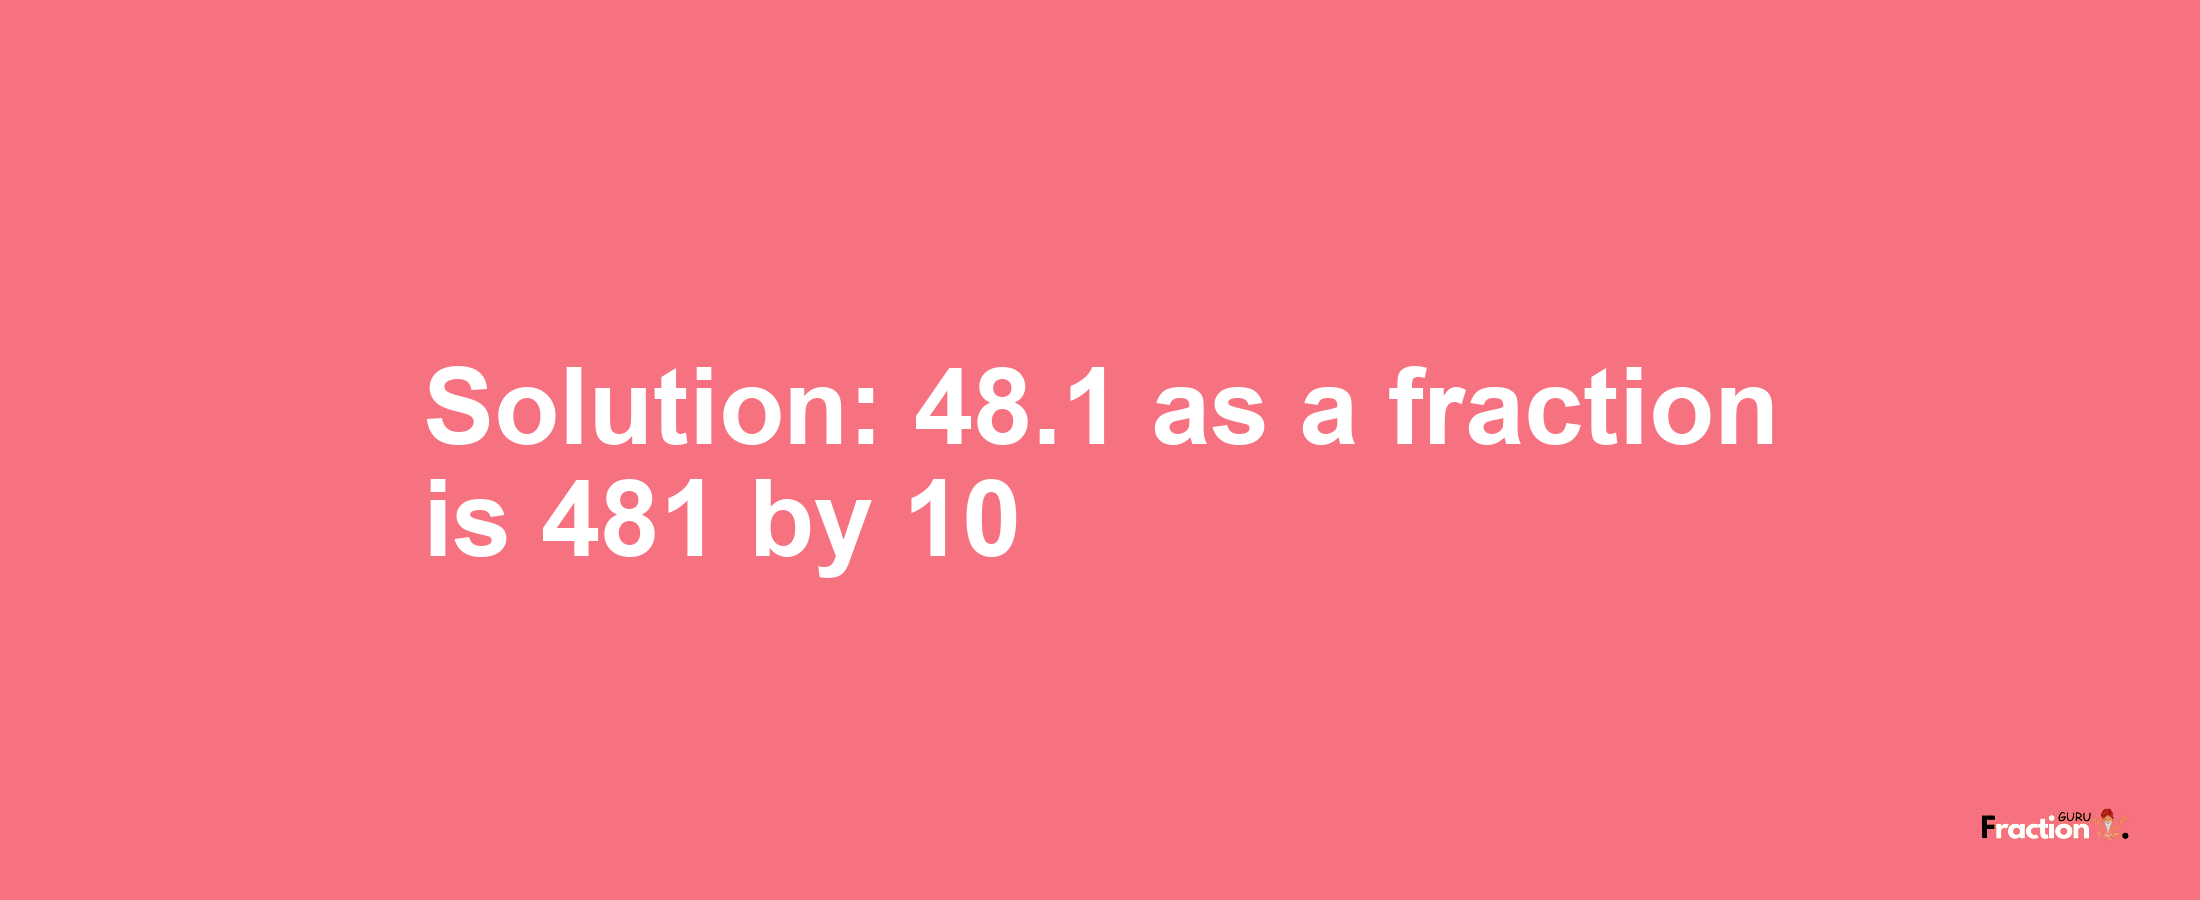 Solution:48.1 as a fraction is 481/10